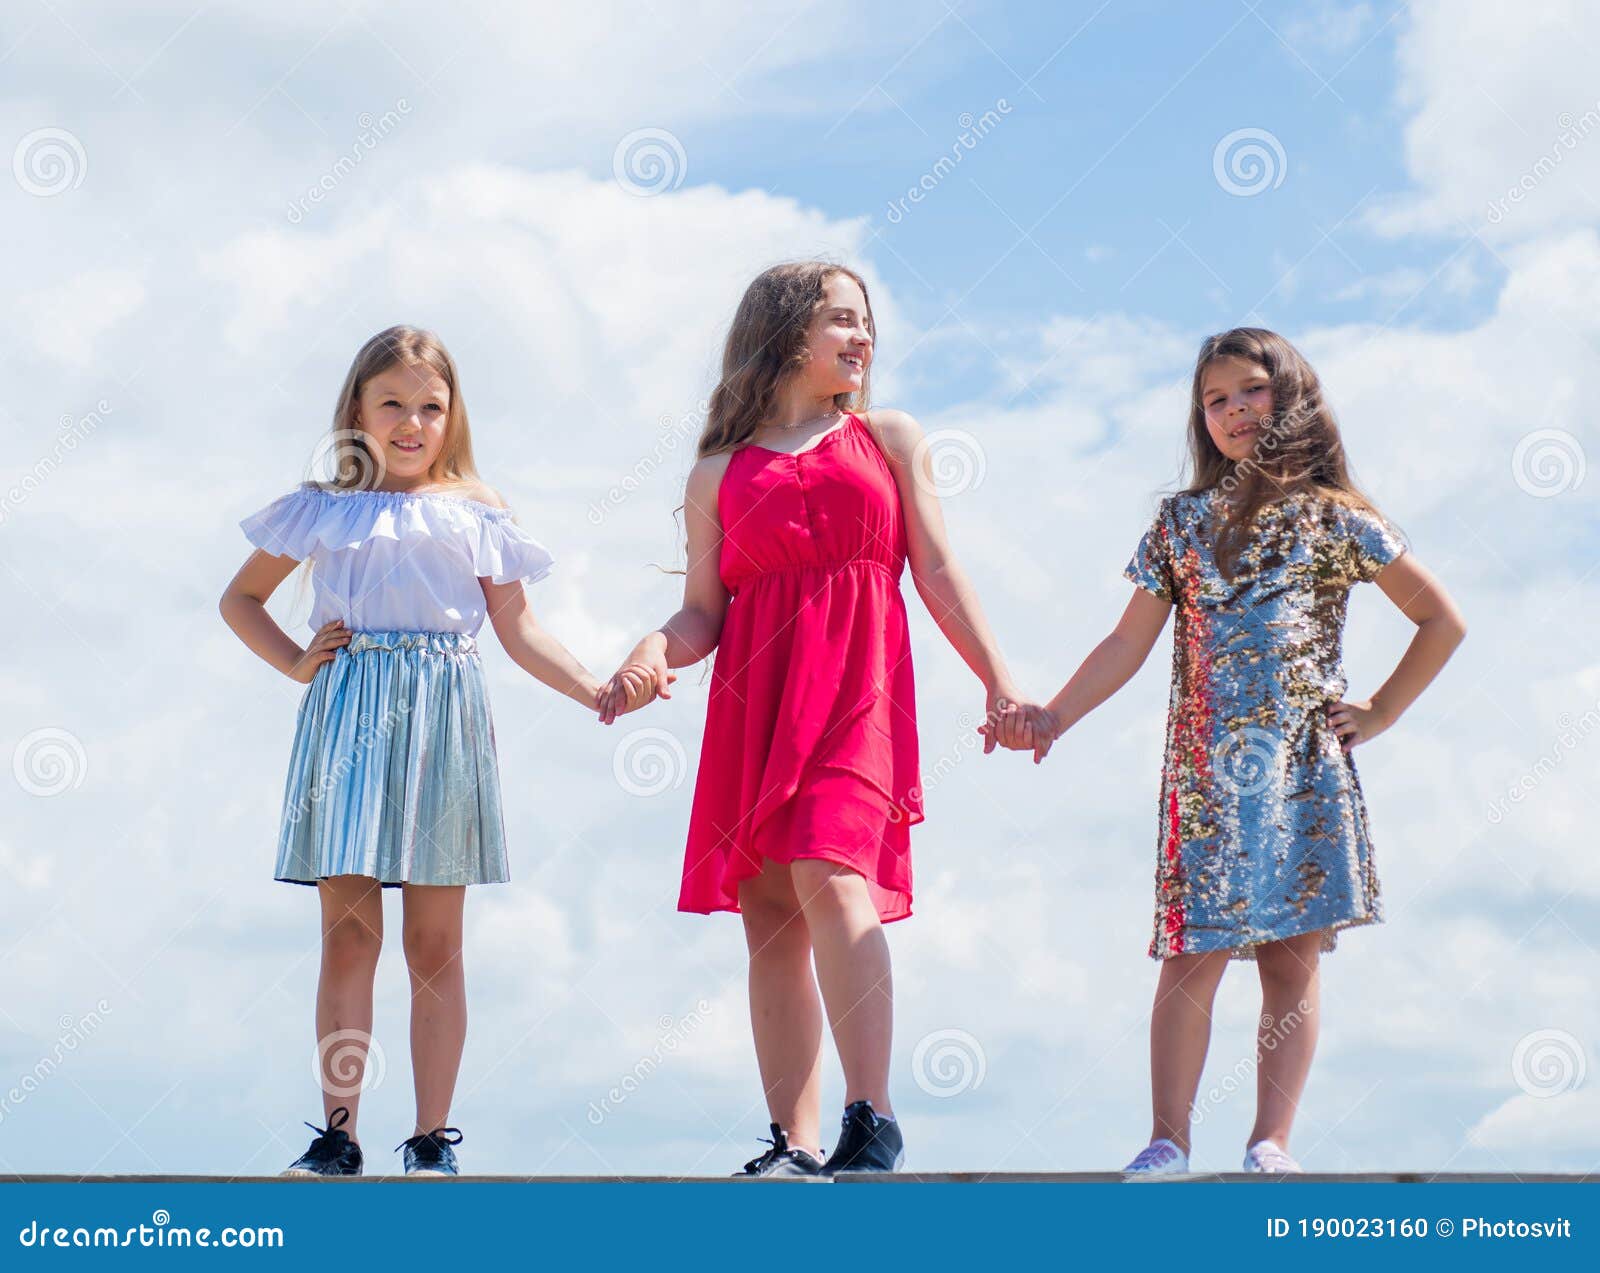 235 Best Friends Forever Hands Photos Free Royalty Free Stock Photos From Dreamstime